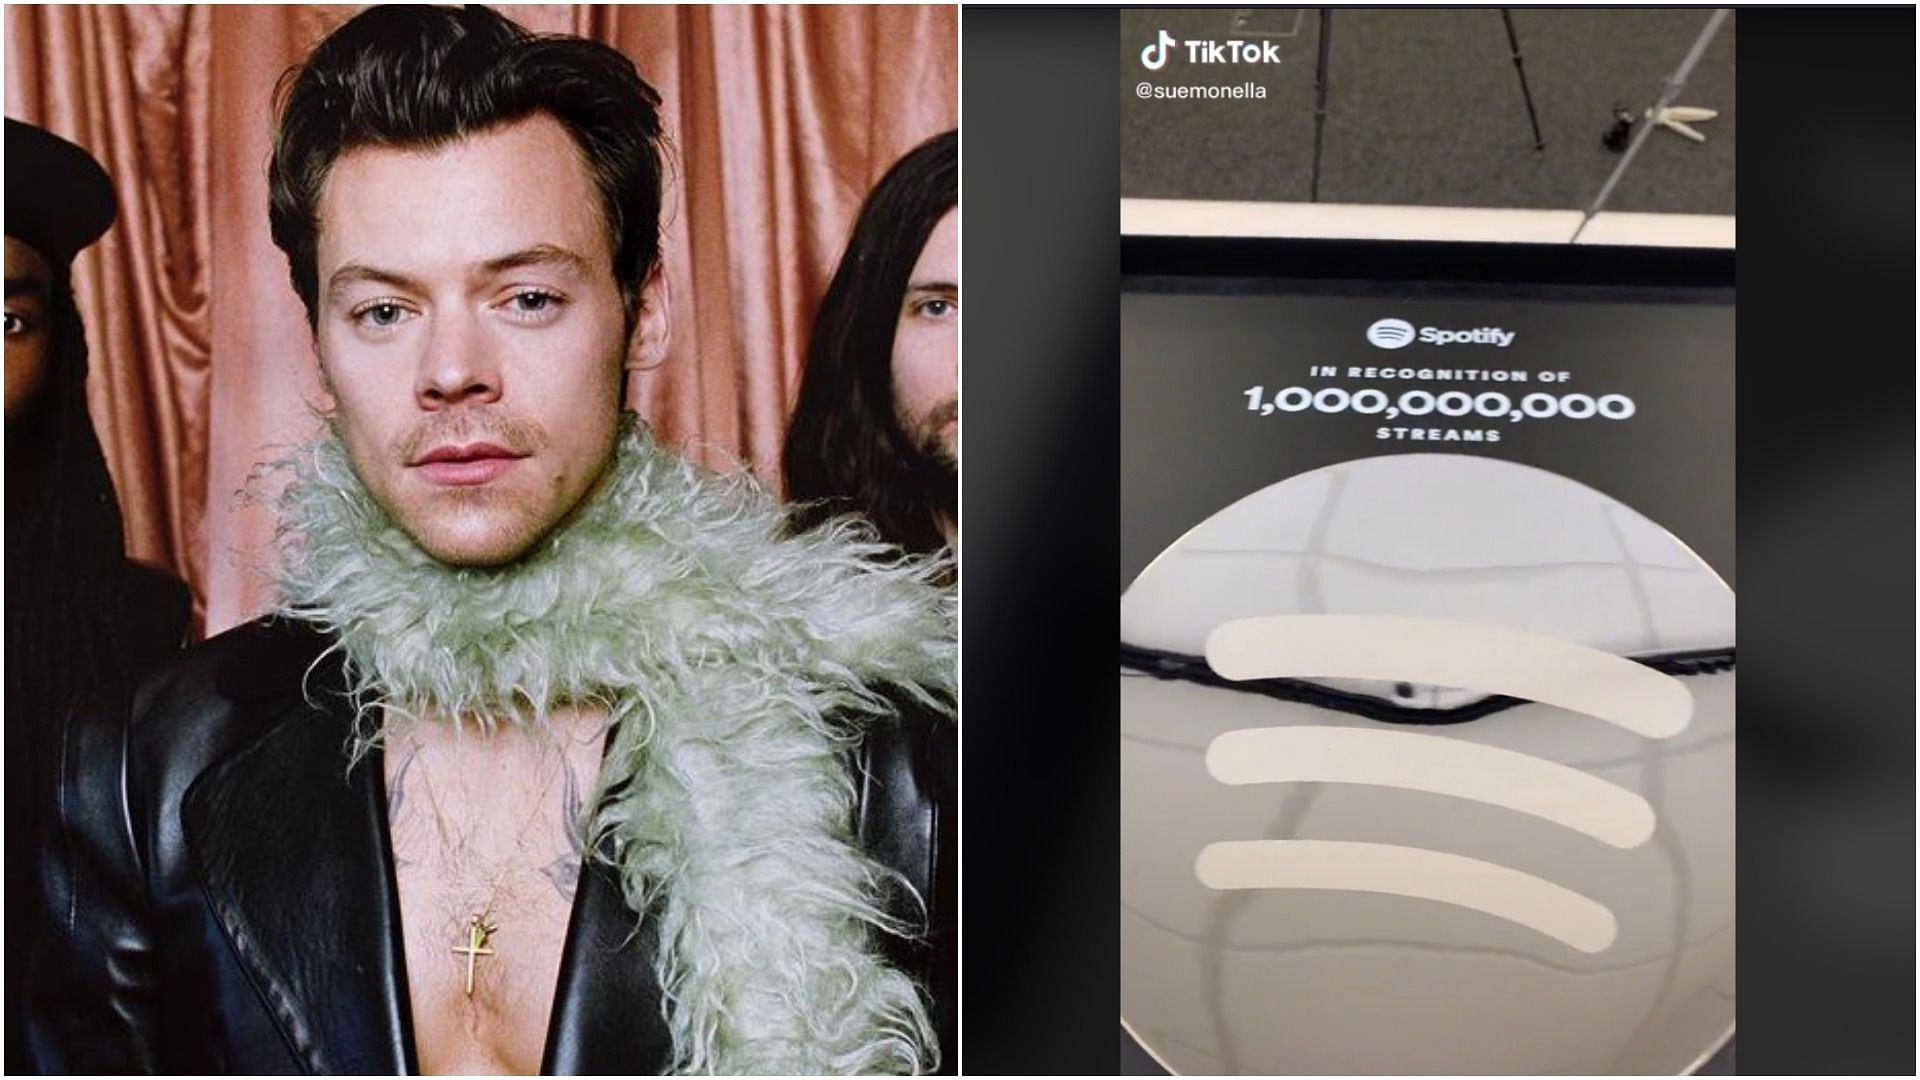 Mysterious TikTok account has fans convinced that it belongs to the singer Harry Styles (Images via @harrystyles/Instagram and @suemonella/TikTok)